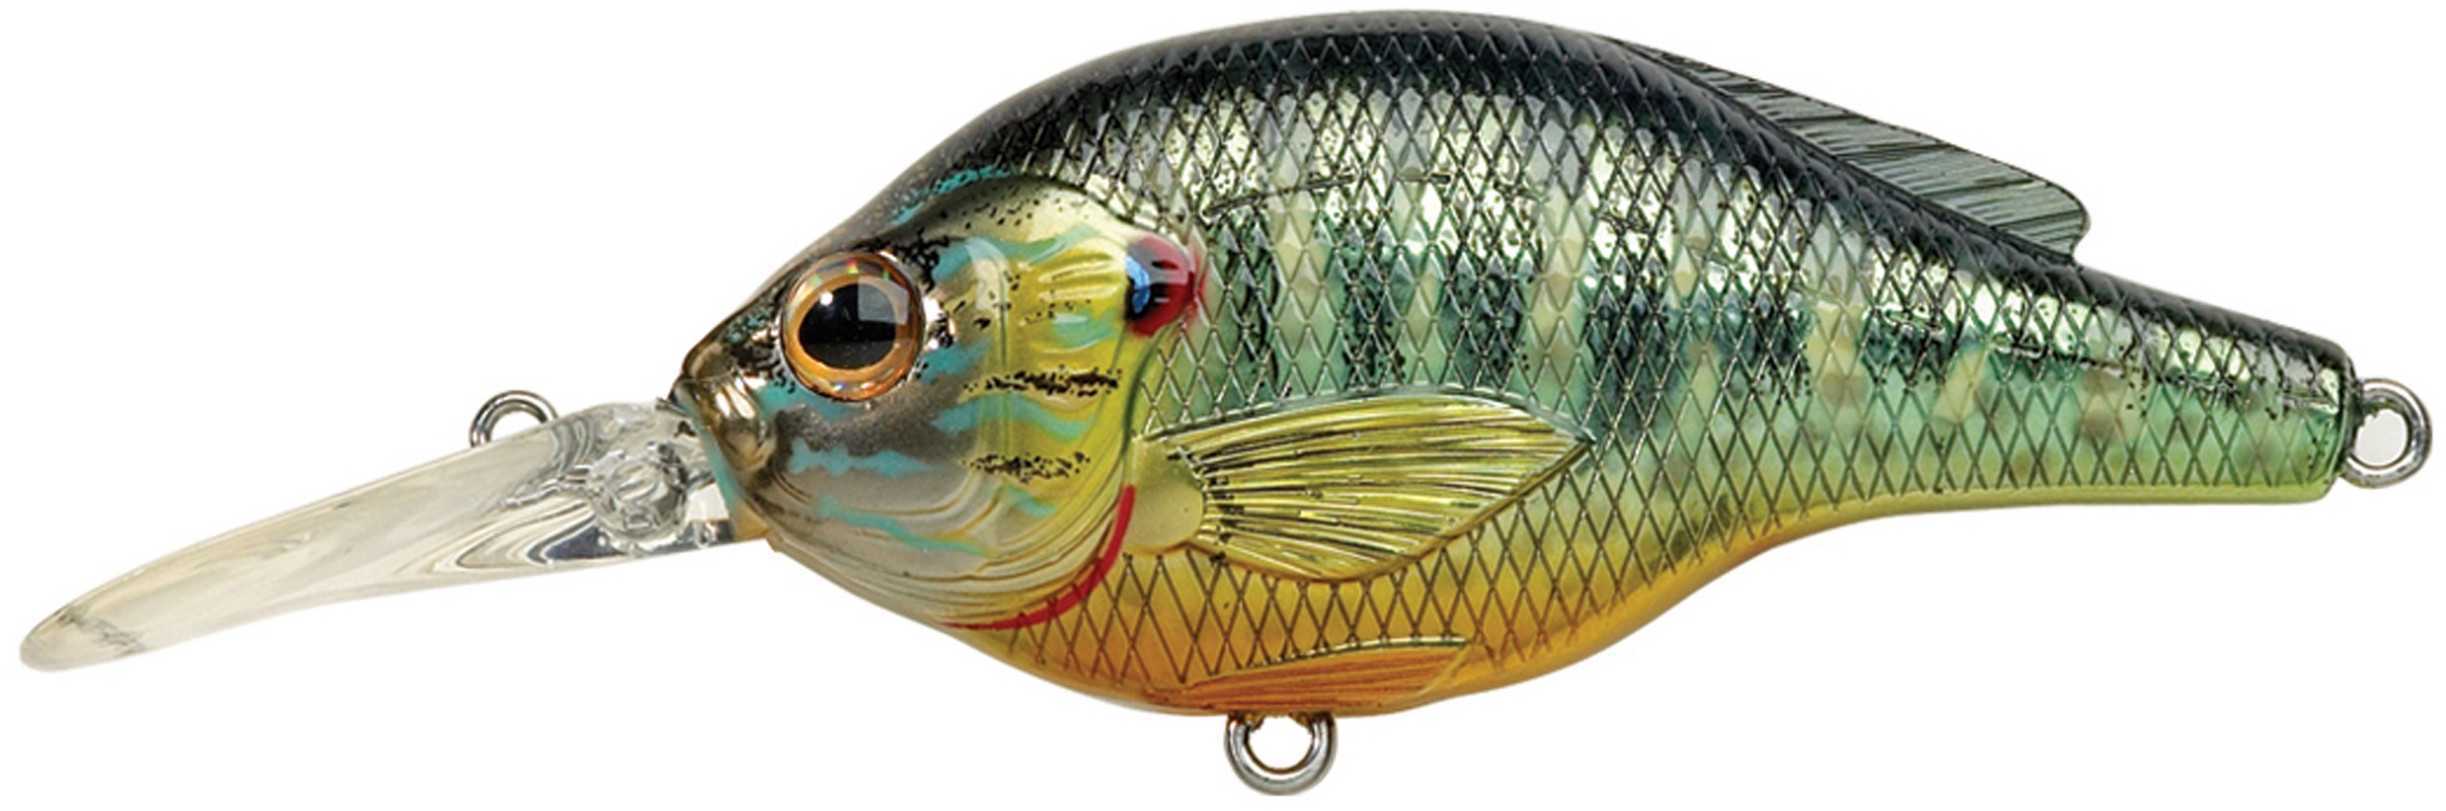 LIVETARGET Lures / Koppers Fishing and Tackle Corp Pumpkinseed Flat Side Roundbill Metallic/Gloss #6 Md: PS57M102